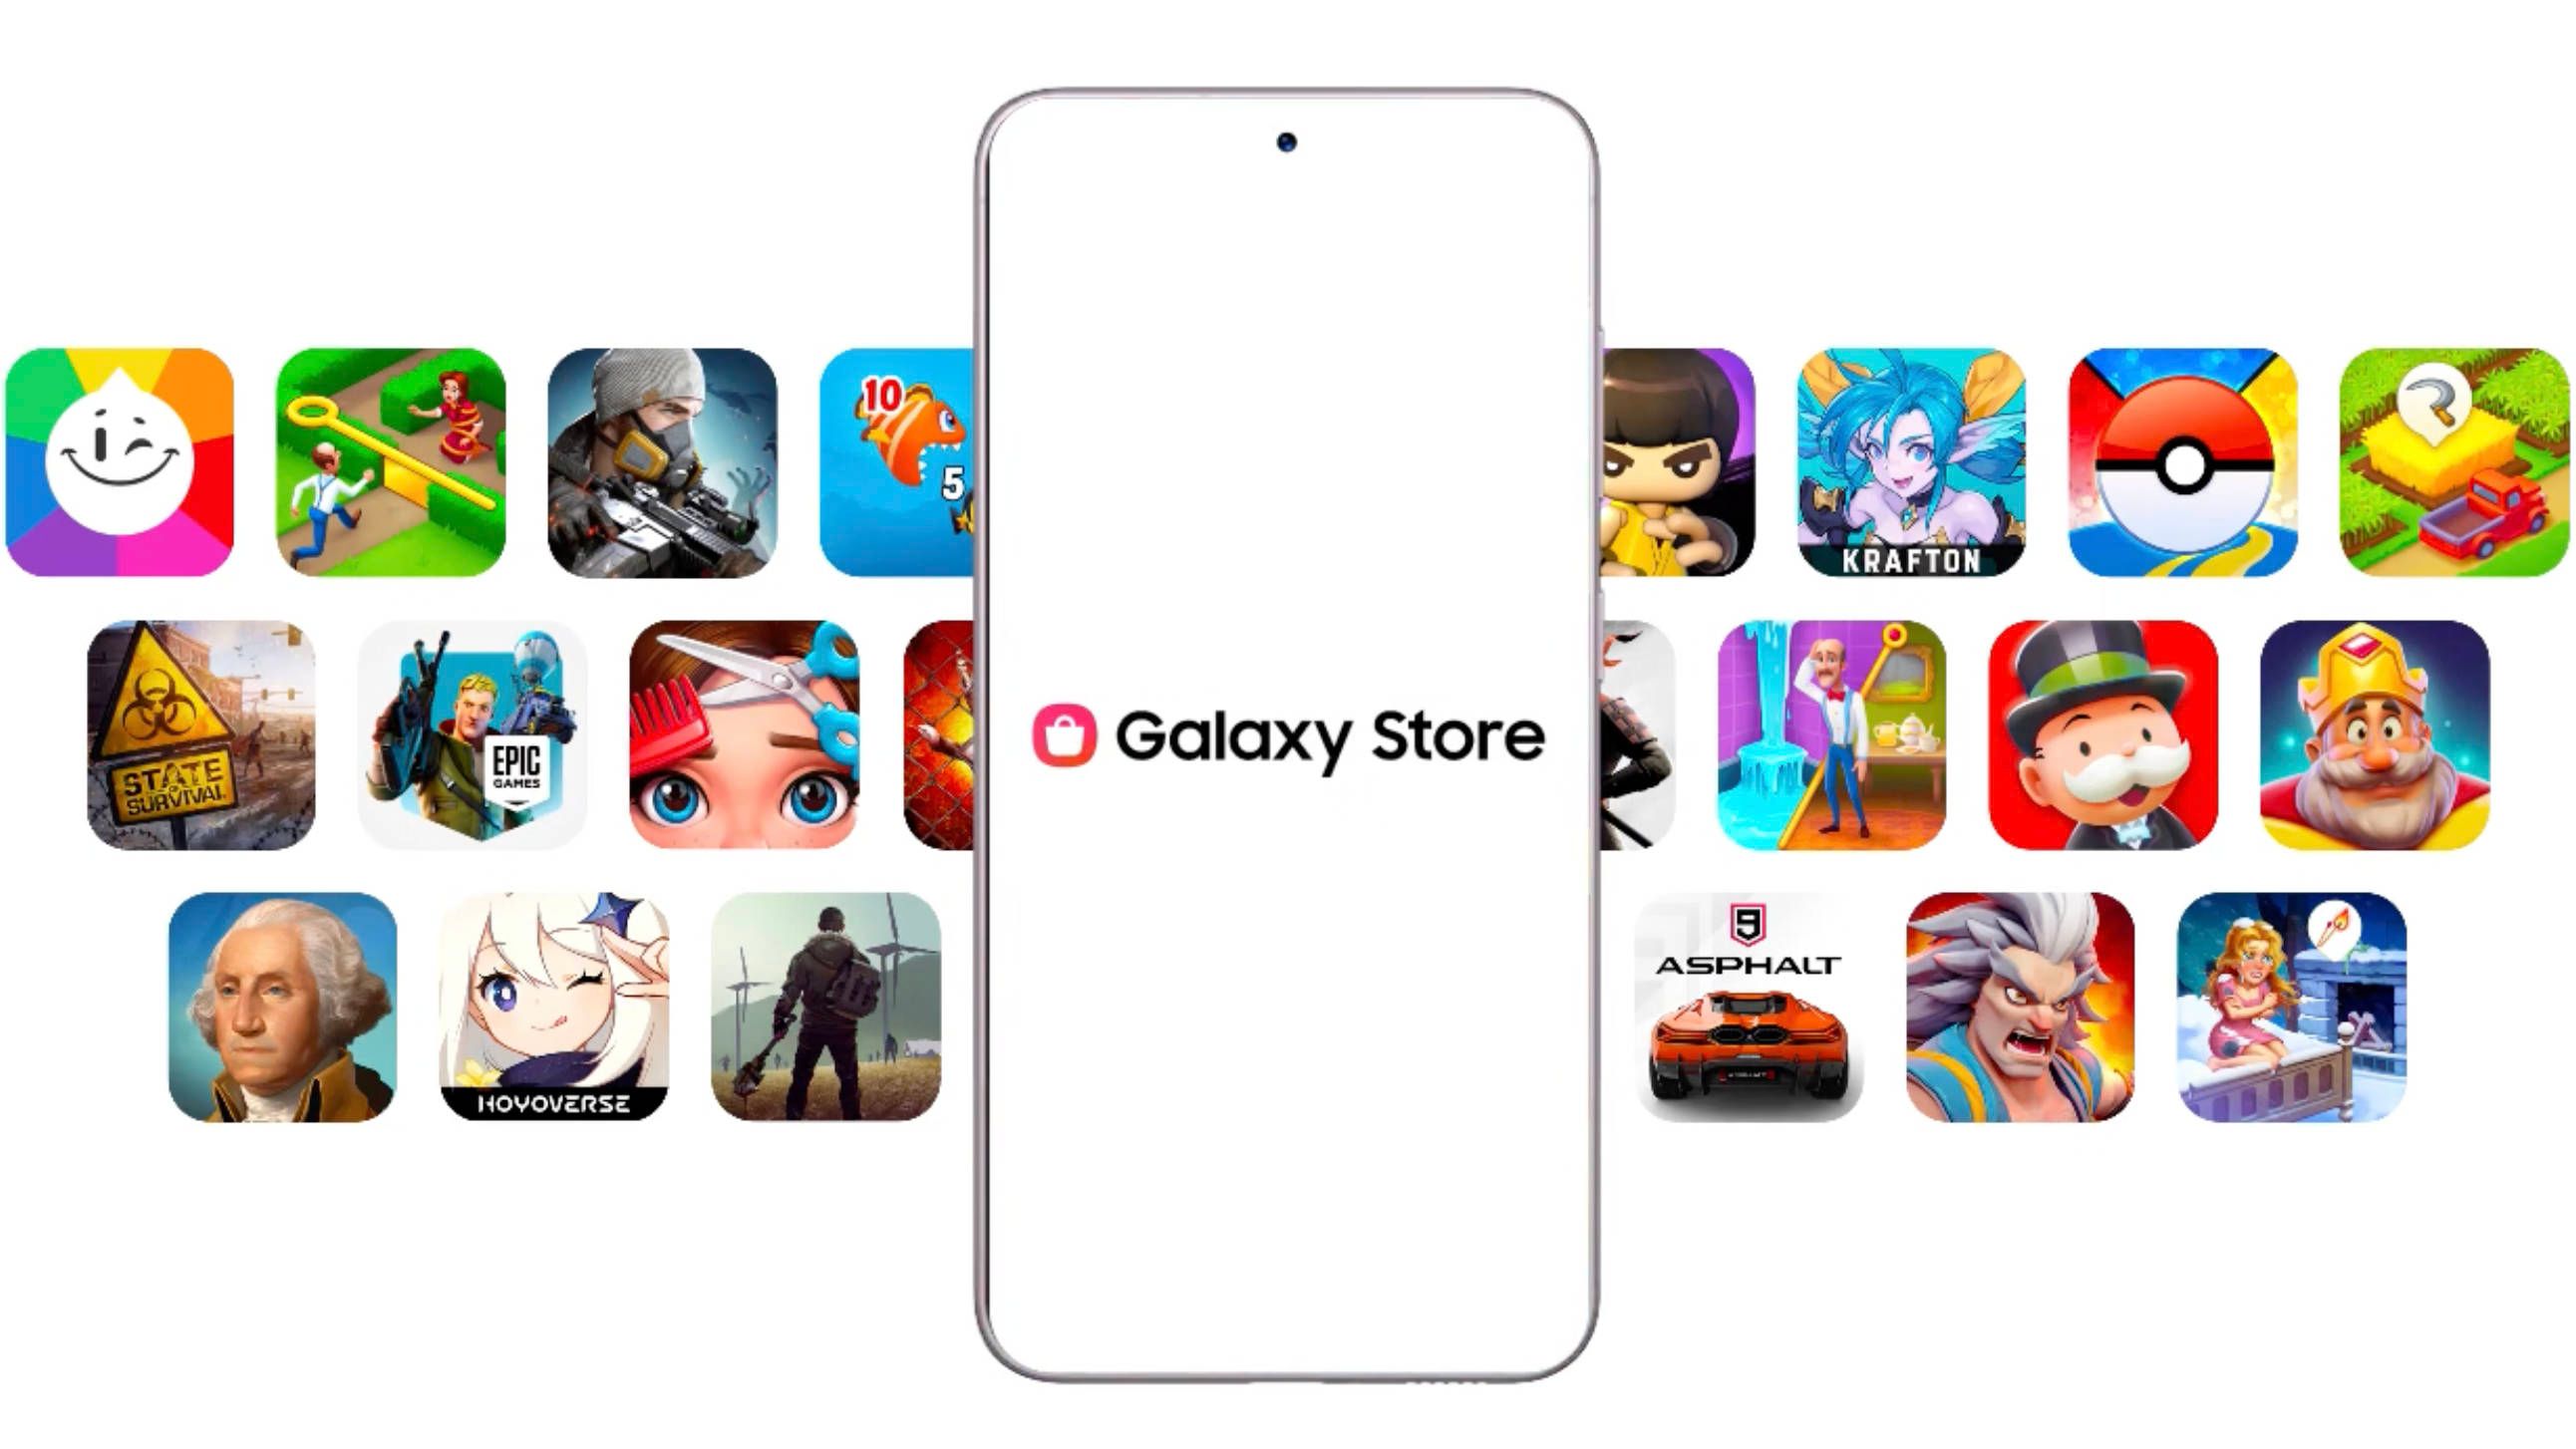 A promotion for the Galaxy Store with various app logos surrounding a phone